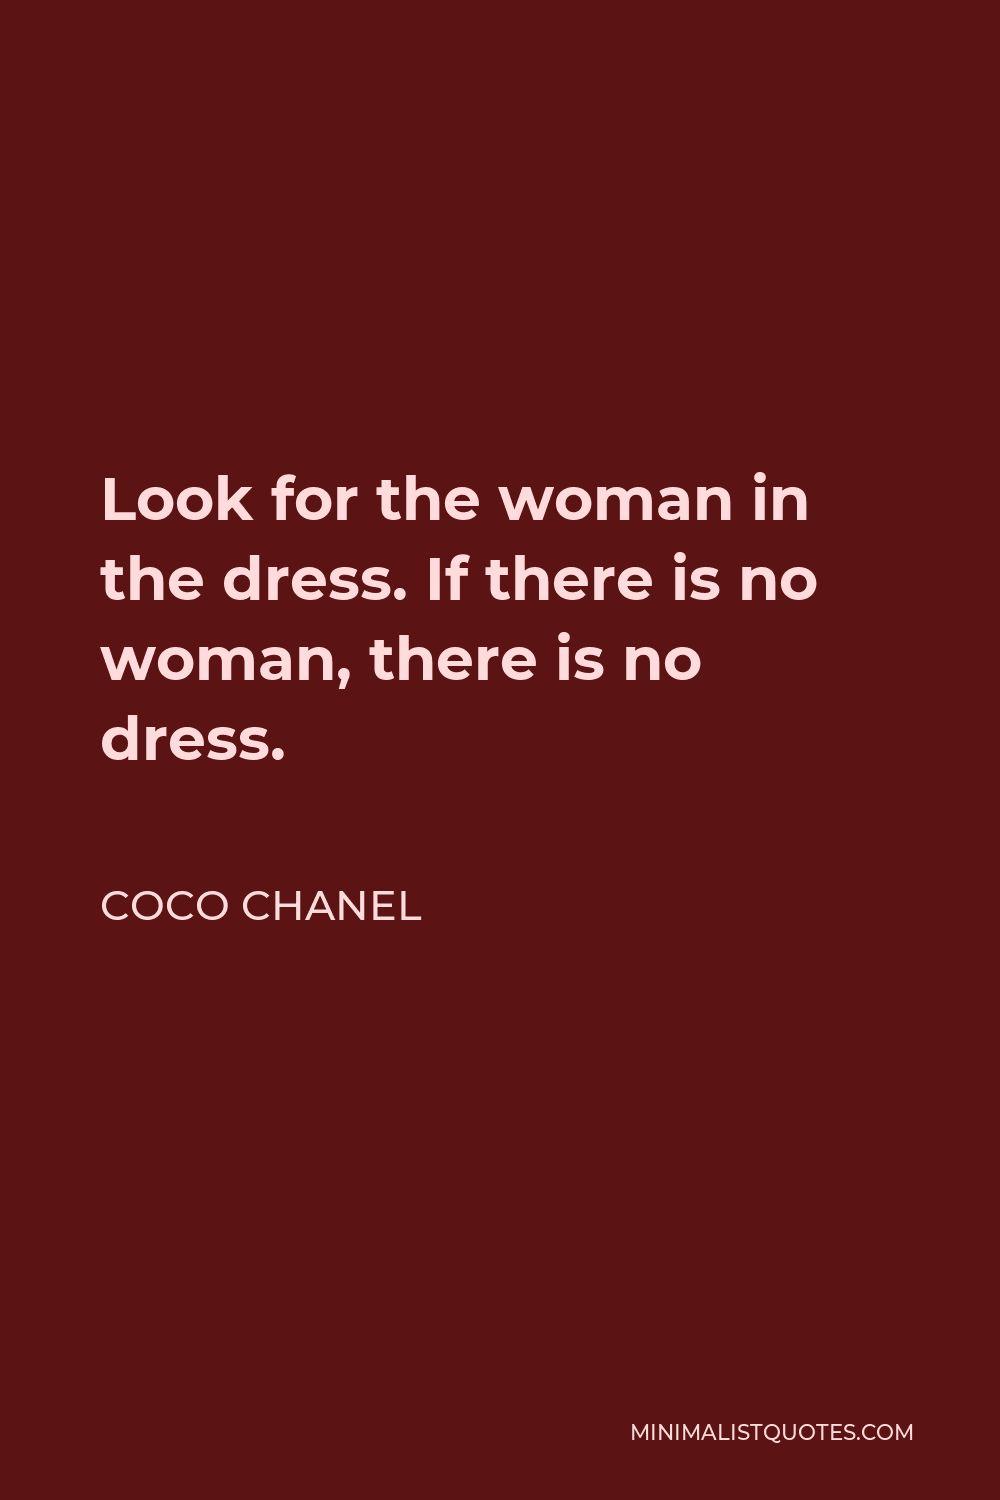 Coco Chanel Quote - Look for the woman in the dress. If there is no woman, there is no dress.